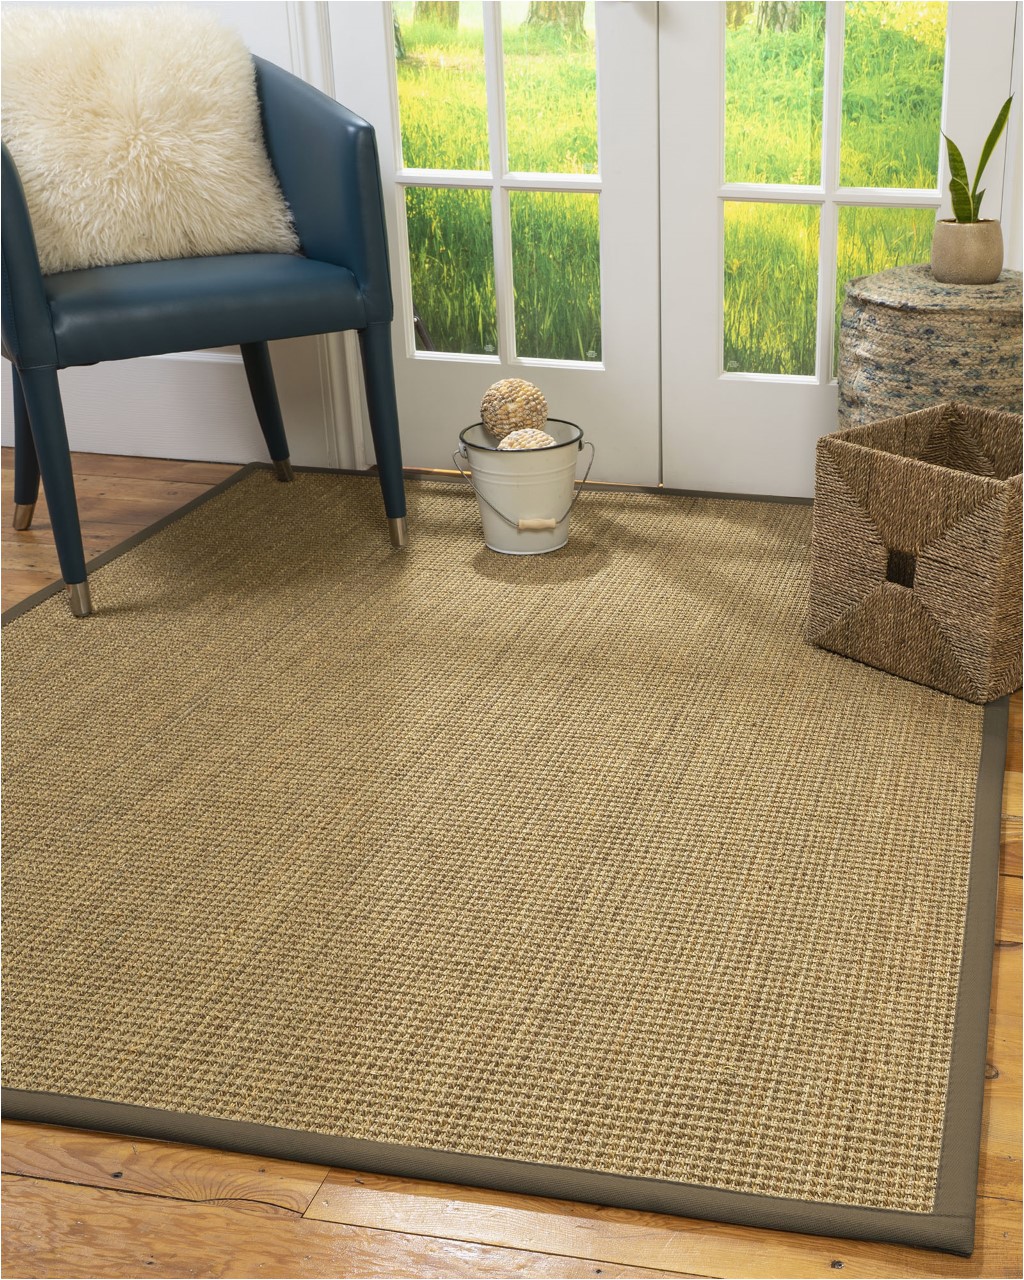 5 by 7 area Rugs at Walmart Natural area Rugs Hamptons Custom Seagrass Rug 5 X 7 Fossil Border